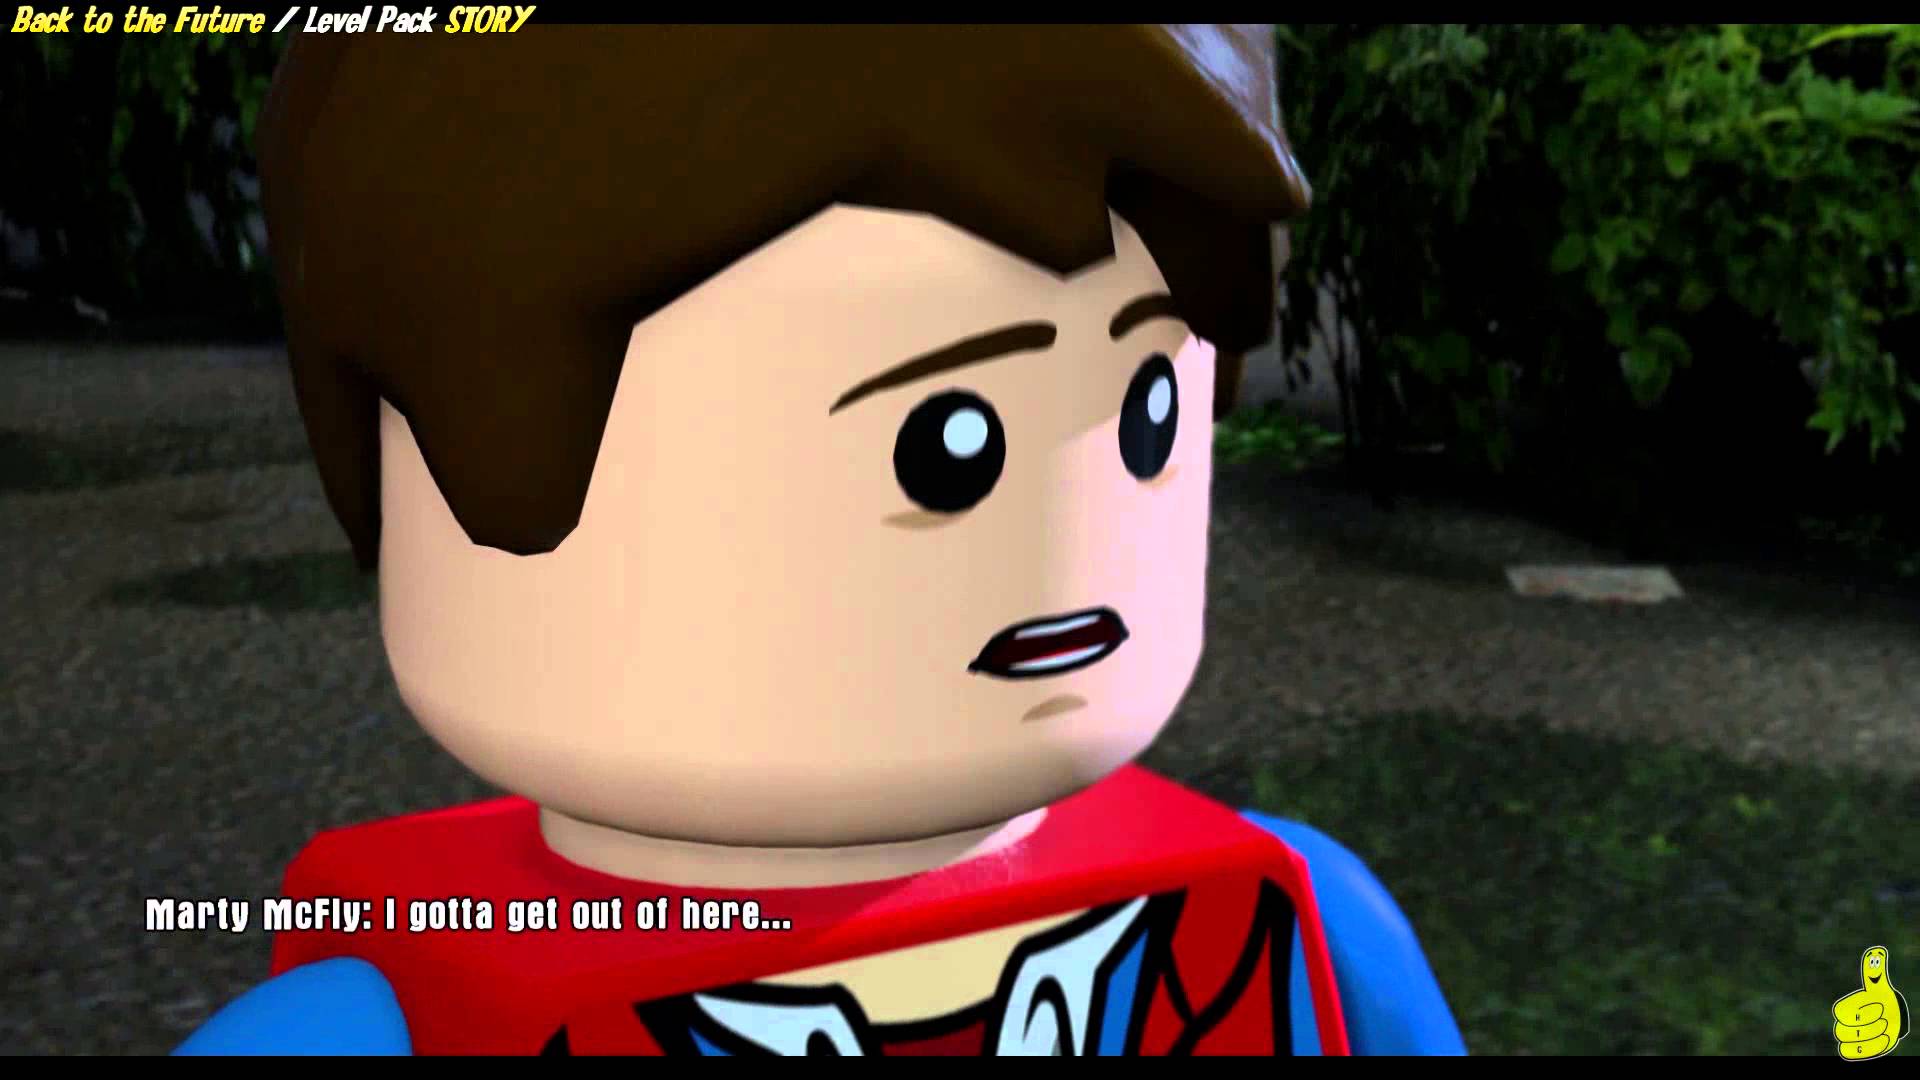 Lego Dimensions: Back to the Future Level Pack STORY/That was heavy Trophy/Achievement – HTG